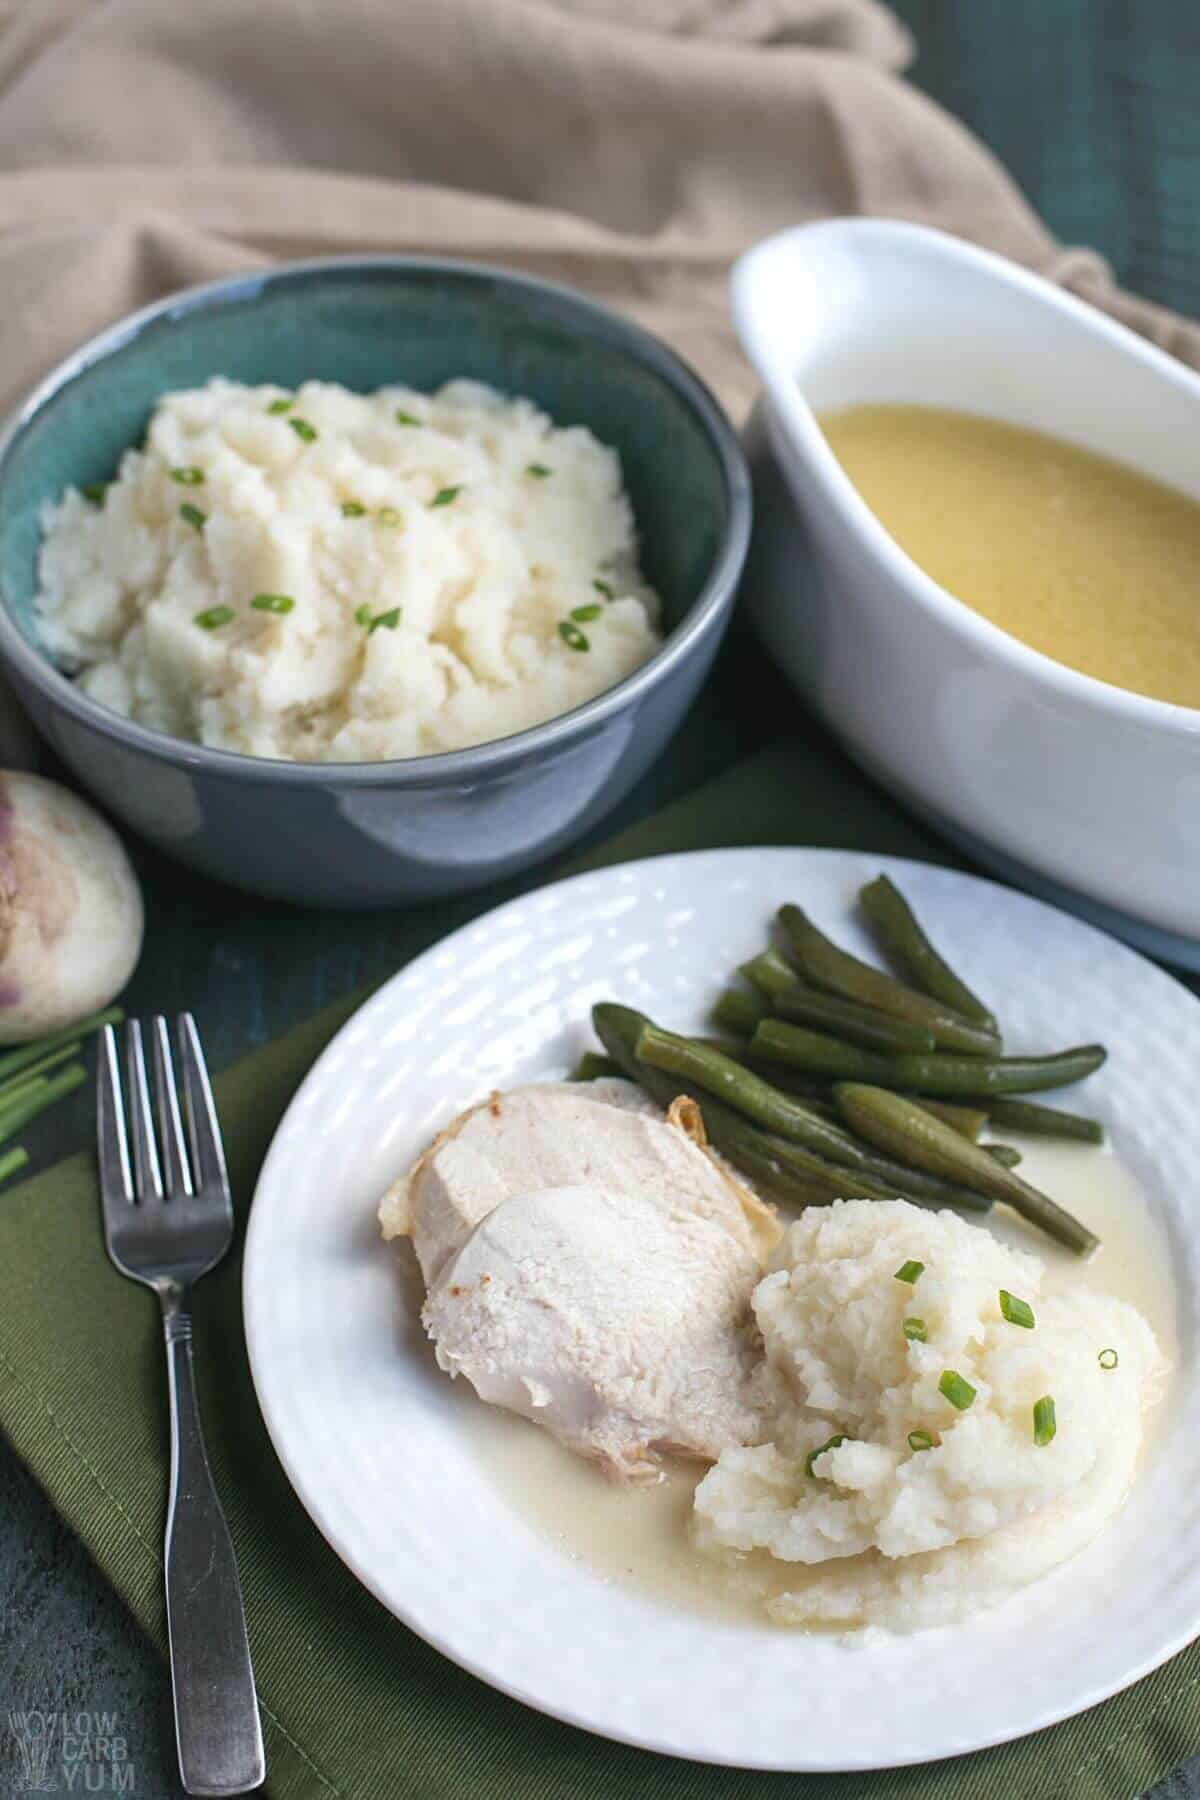 serving mashed turnips with turkey and gravy.